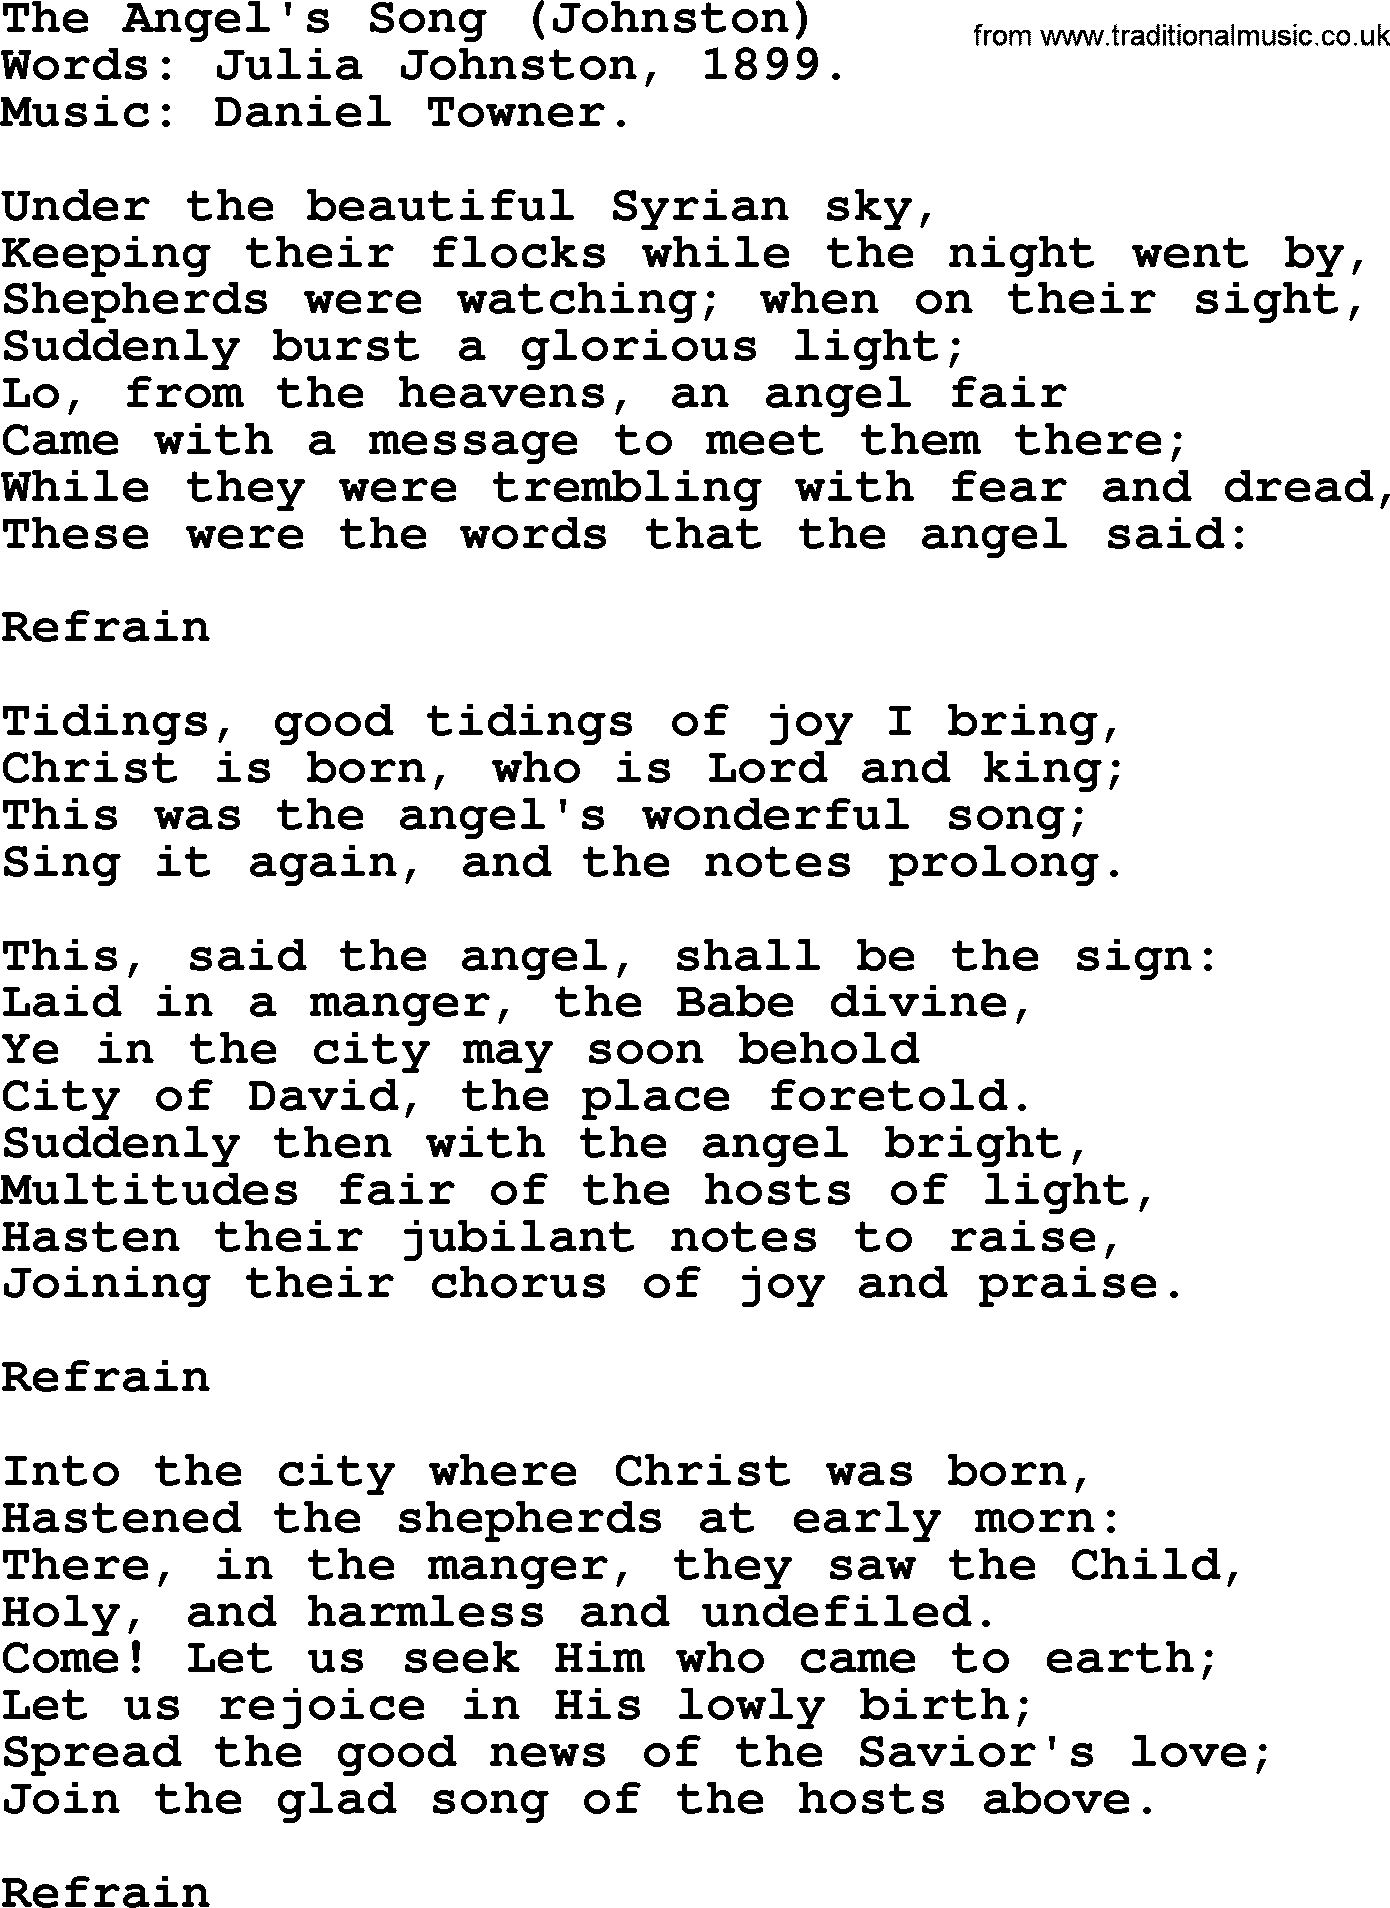 Christmas Hymns, Carols and Songs, title: The Angel's Song (johnston), lyrics with PDF